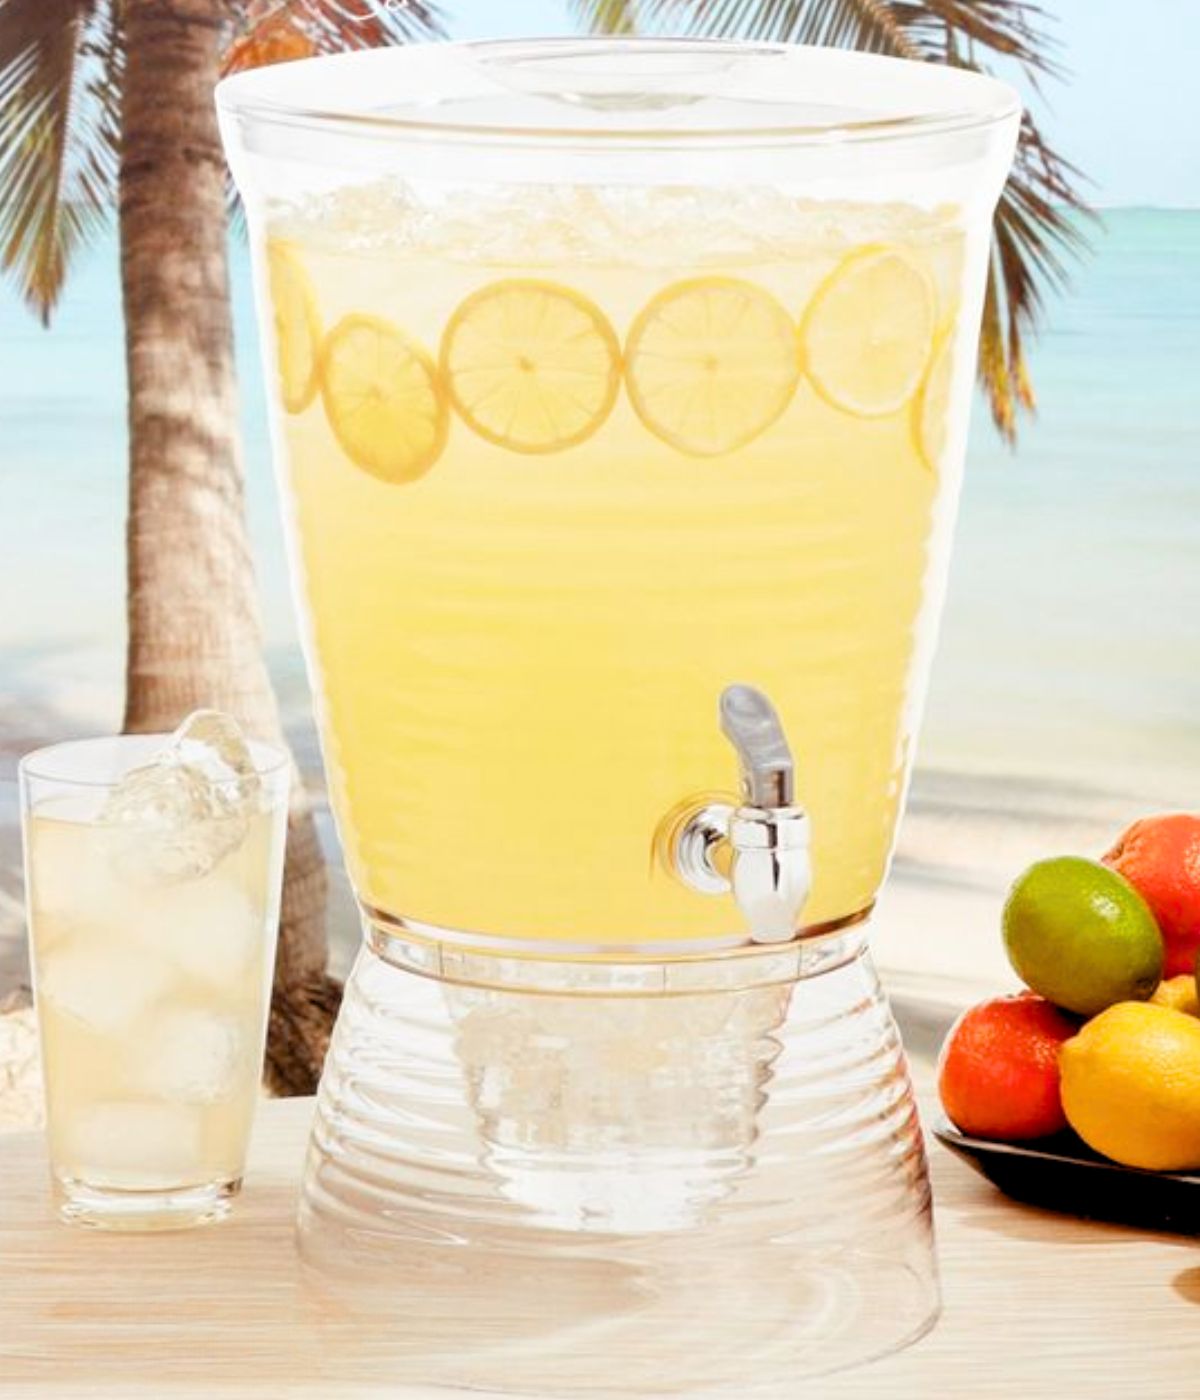 A 2.5 gallon drink dispenser filled with lemonade and ice sitting next to a glass of lemonade and a plate of citrus fruits